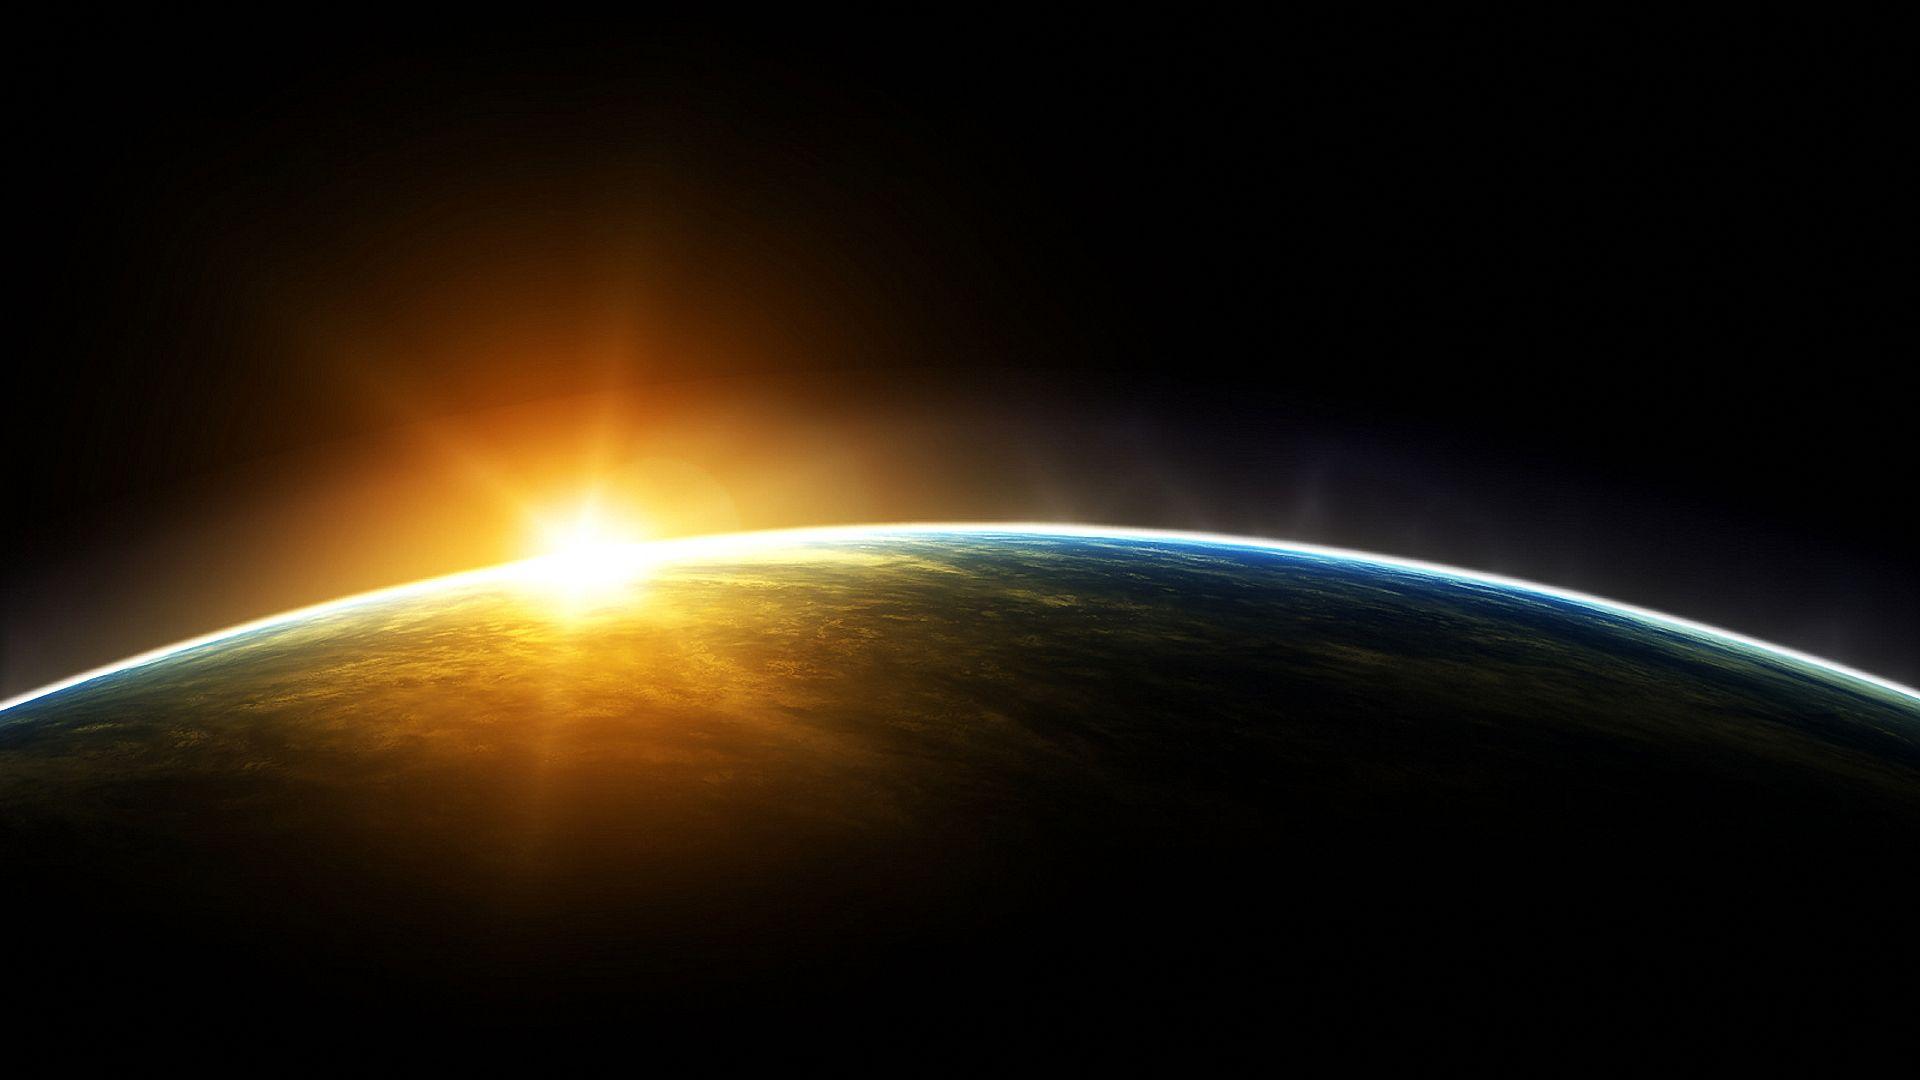 Earth From Space Wallpaper HD. I HD Image